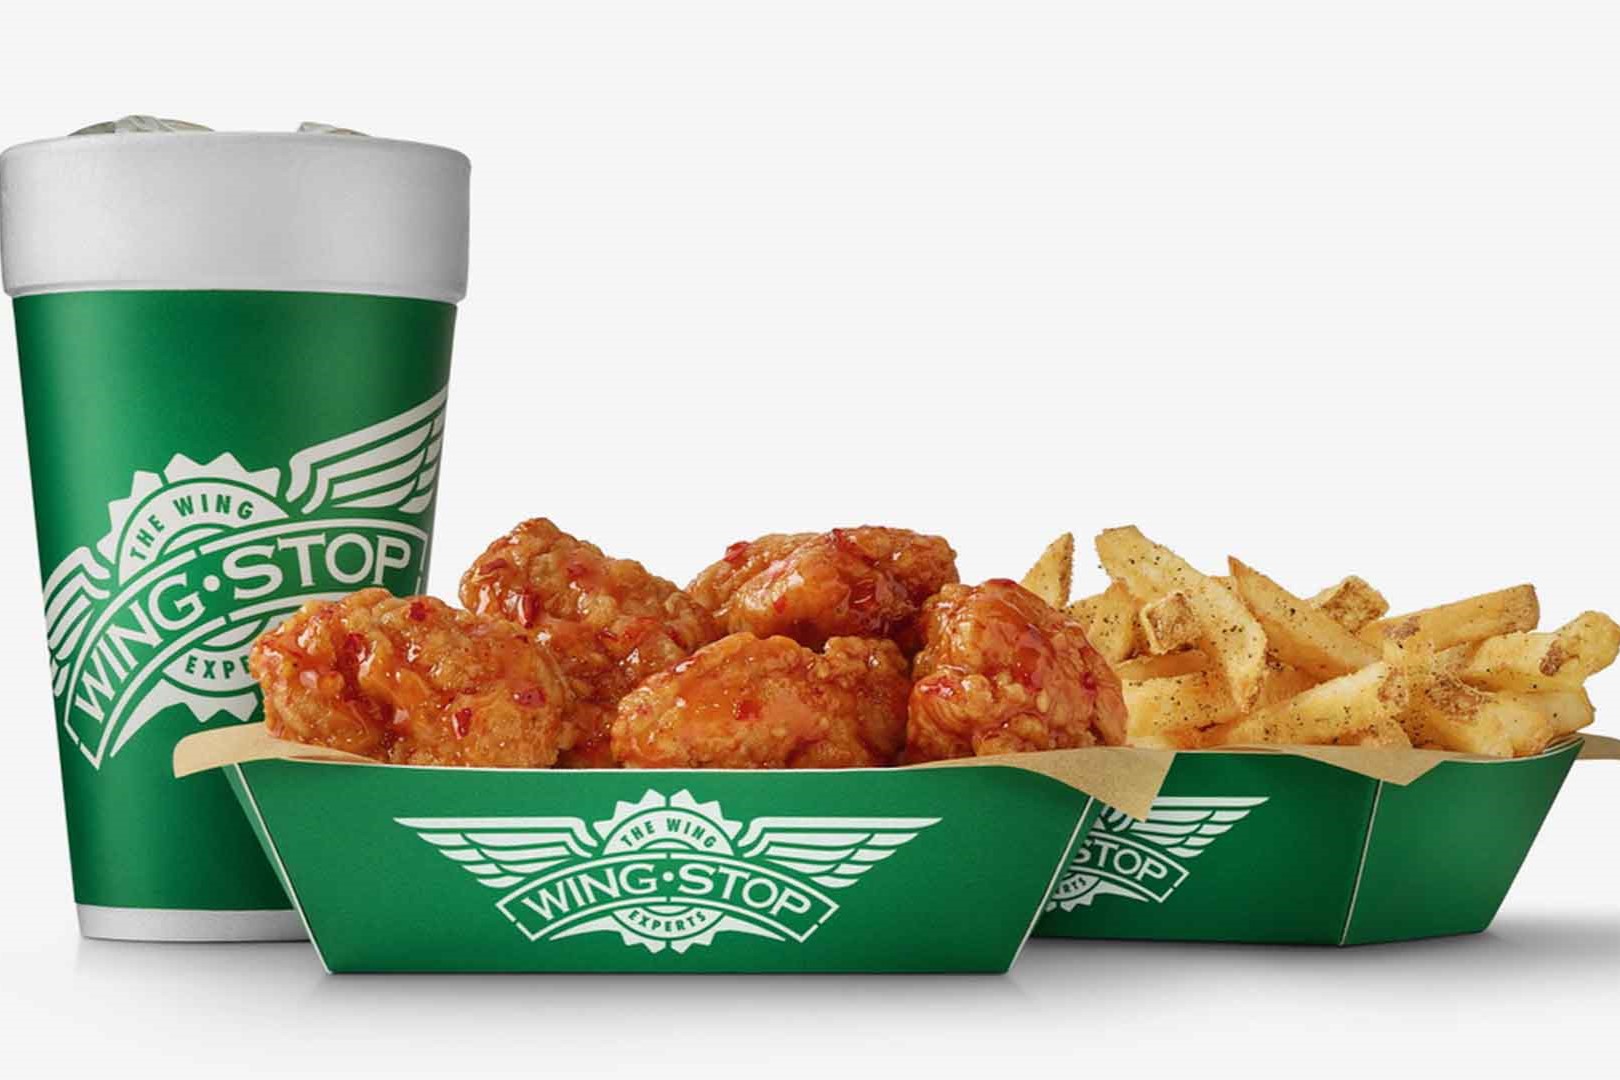 11-wing-stop-nutrition-facts